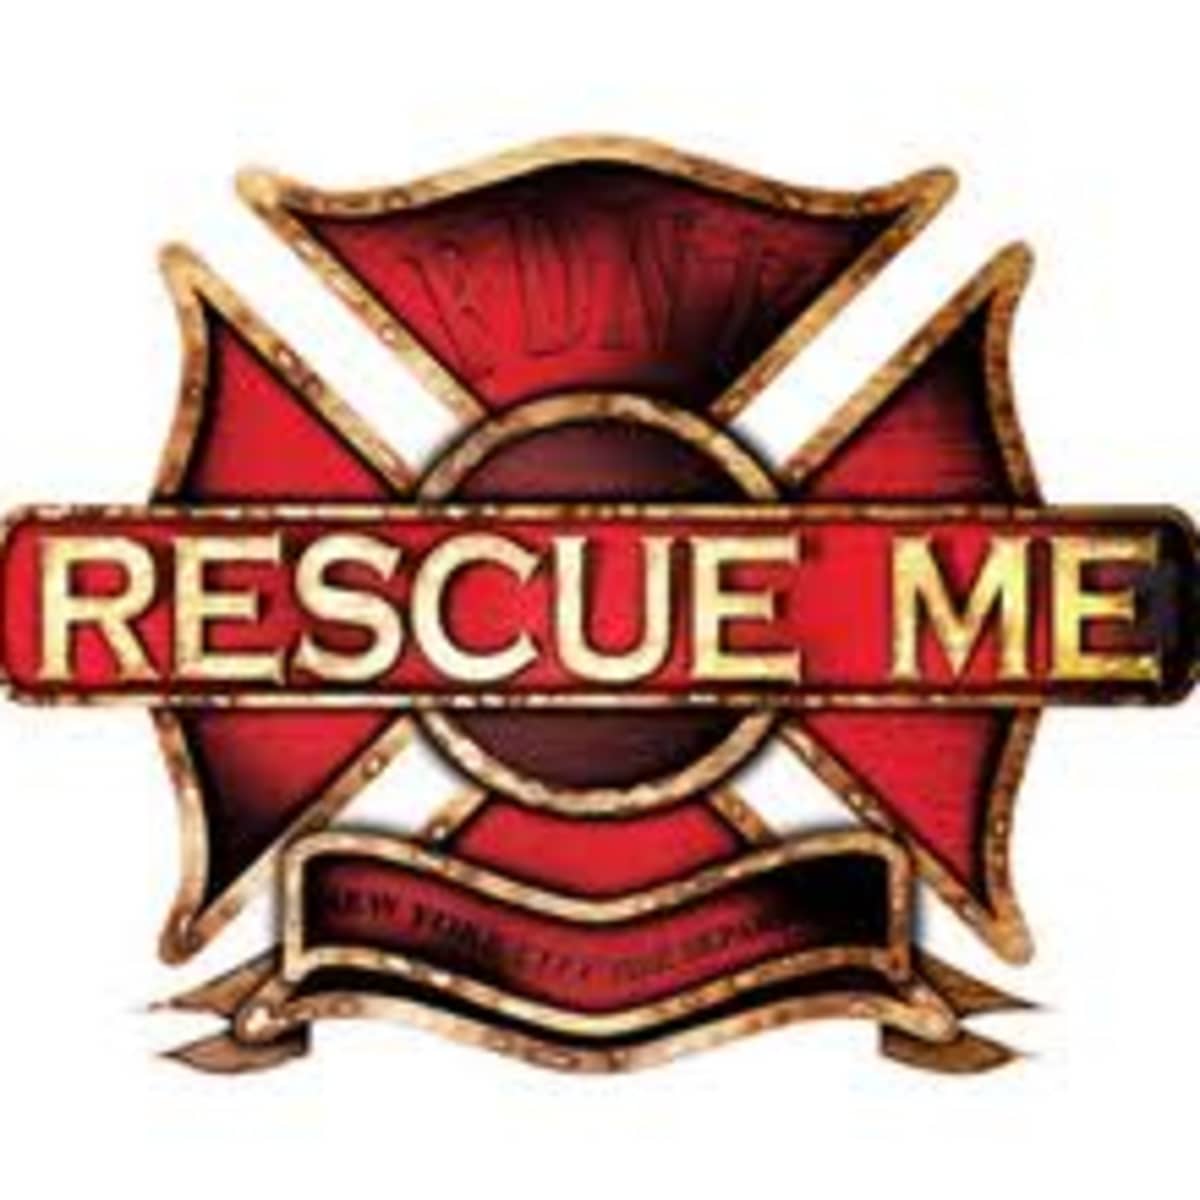 Behind the dysfunctional men of 'Rescue Me' are the women with